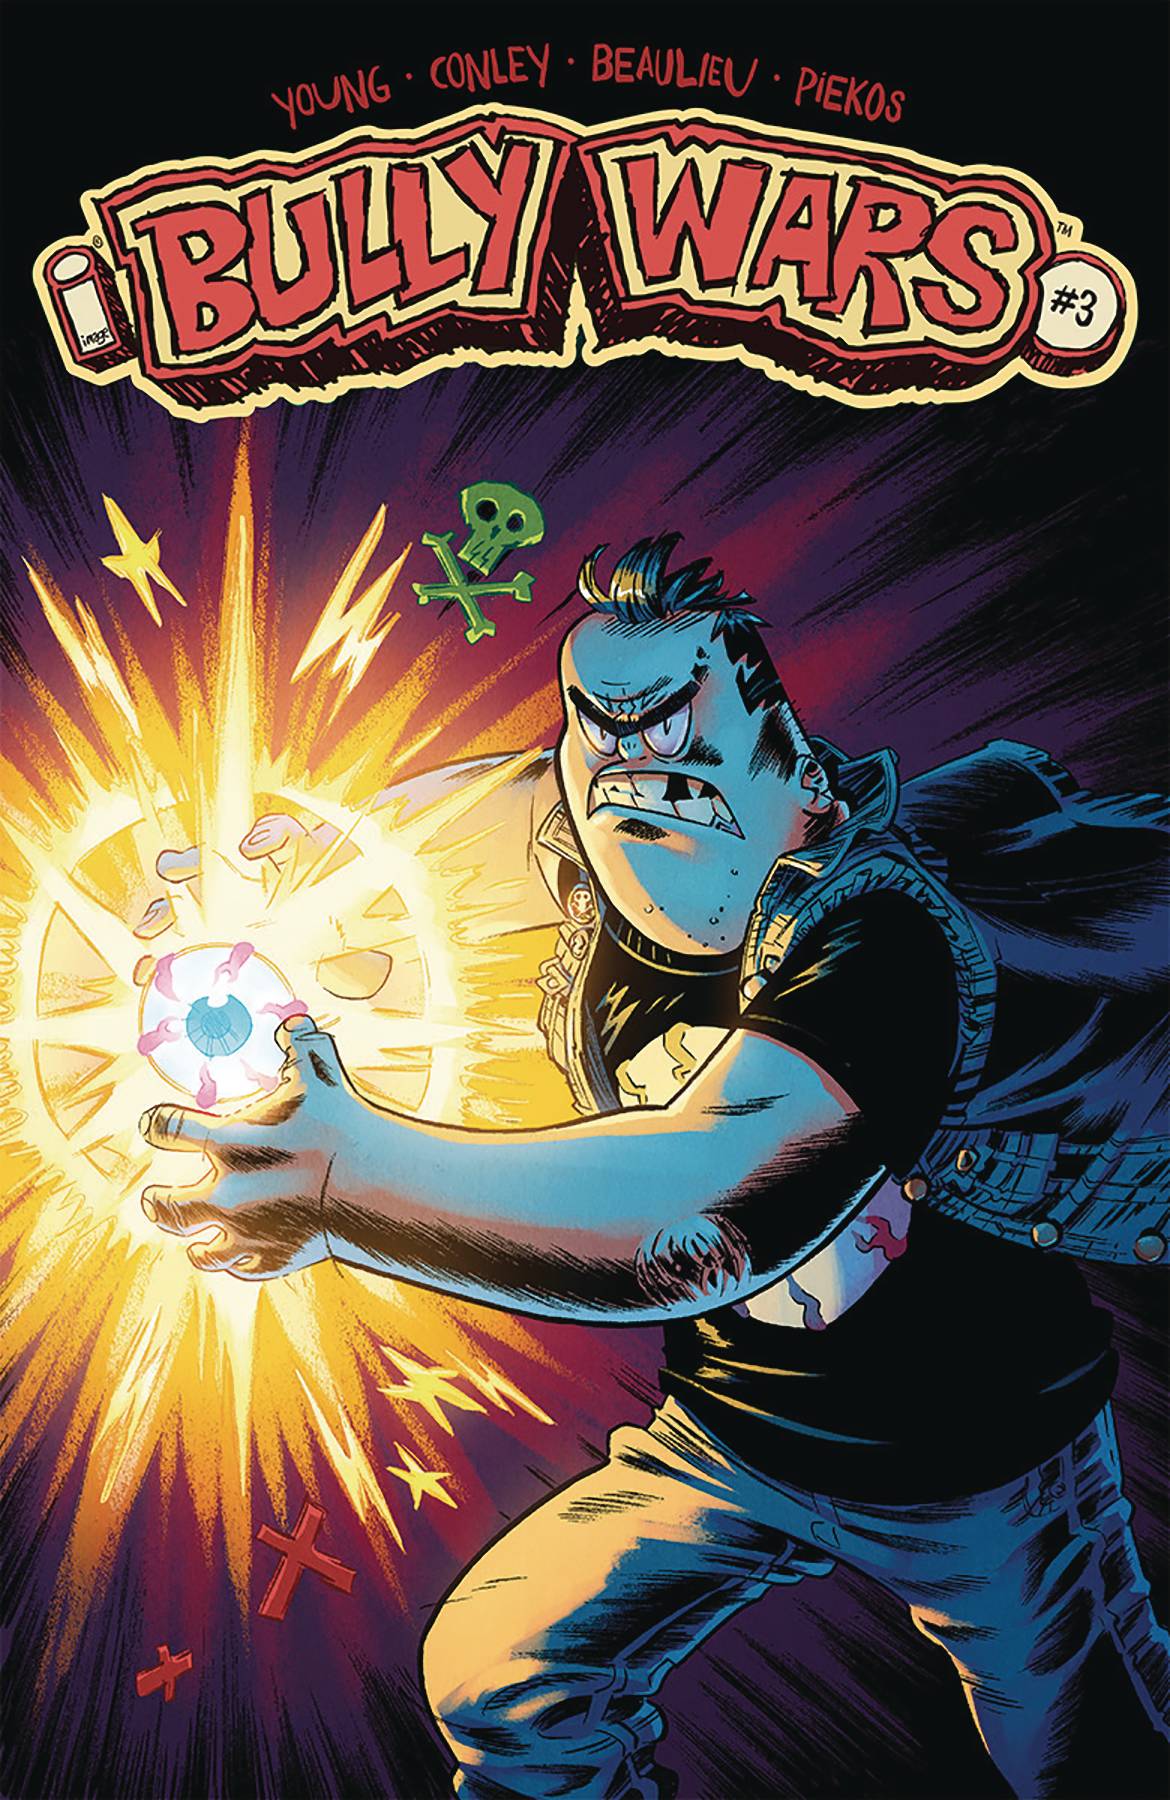 Bully Wars #3 Cover A Conley